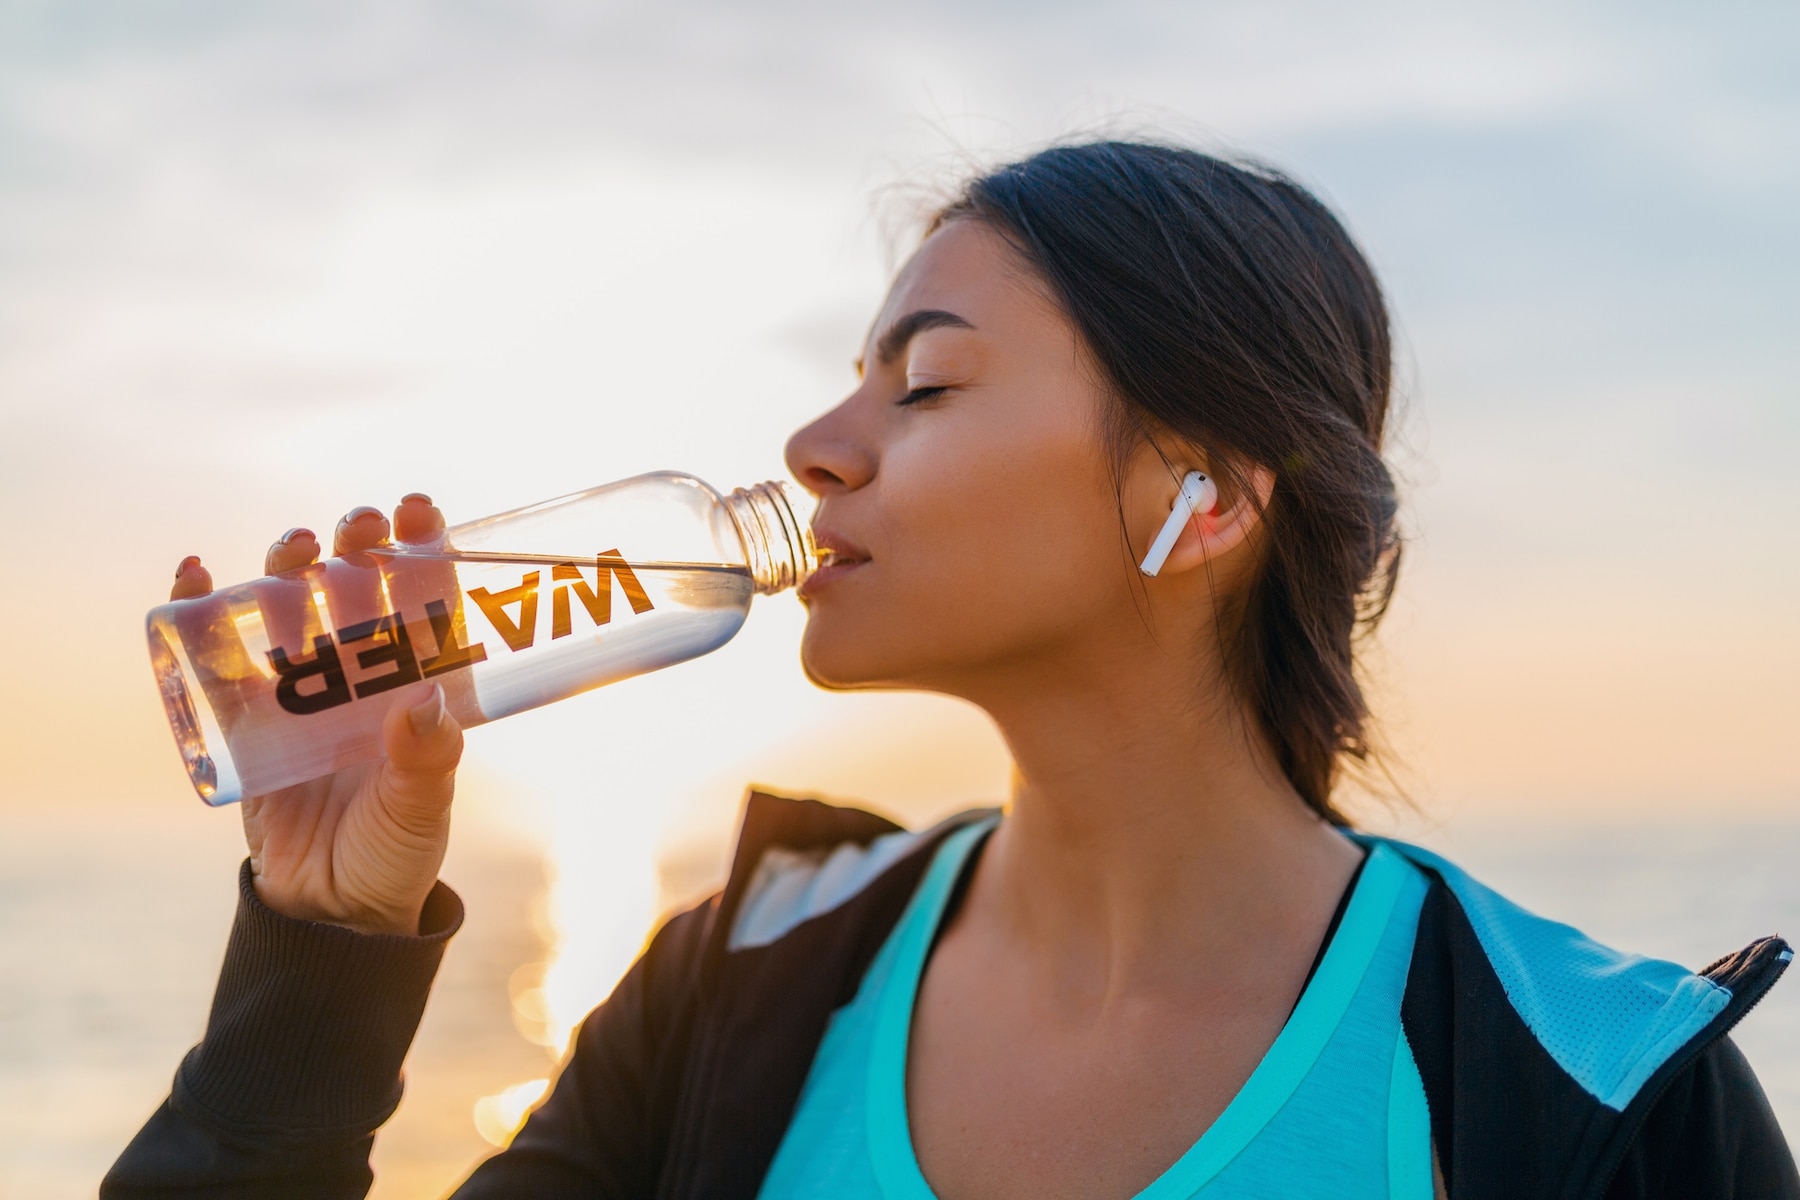 attractive-slim-woman-doing-sport-exercises-morning-sunrise-beach-sports-wear-thirsty-drinking-water-bottle-healthy-lifestyle-listening-music-wireless-earphones-smiling-happy_285396-5555.jpg